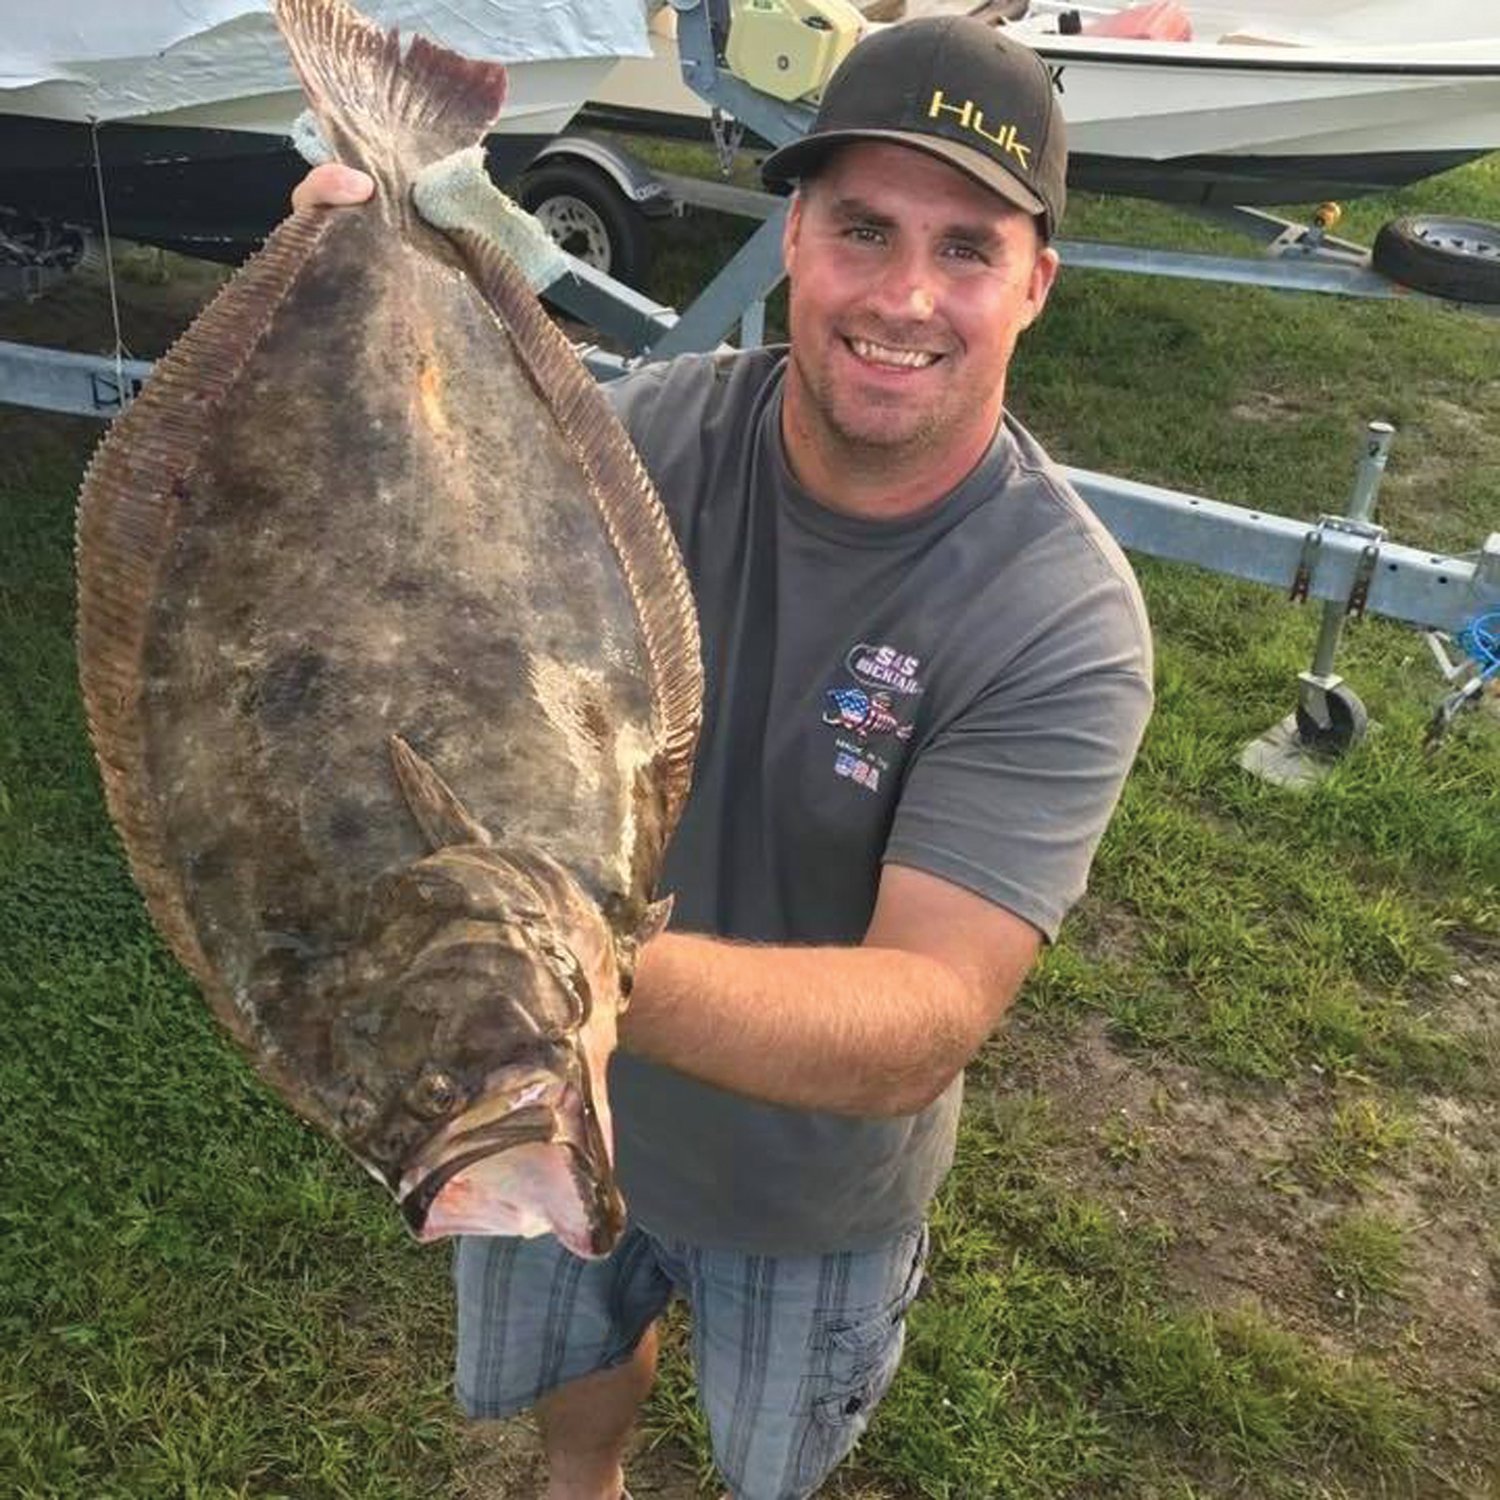 CHAMPIONSHIP FLUKE FISHING: Ron Redrow of the El Nino Fishing Team will speak at a RI Saltwater Anglers Association seminar this Monday, 7:00 p.m. Visit www.risaa.org for information.